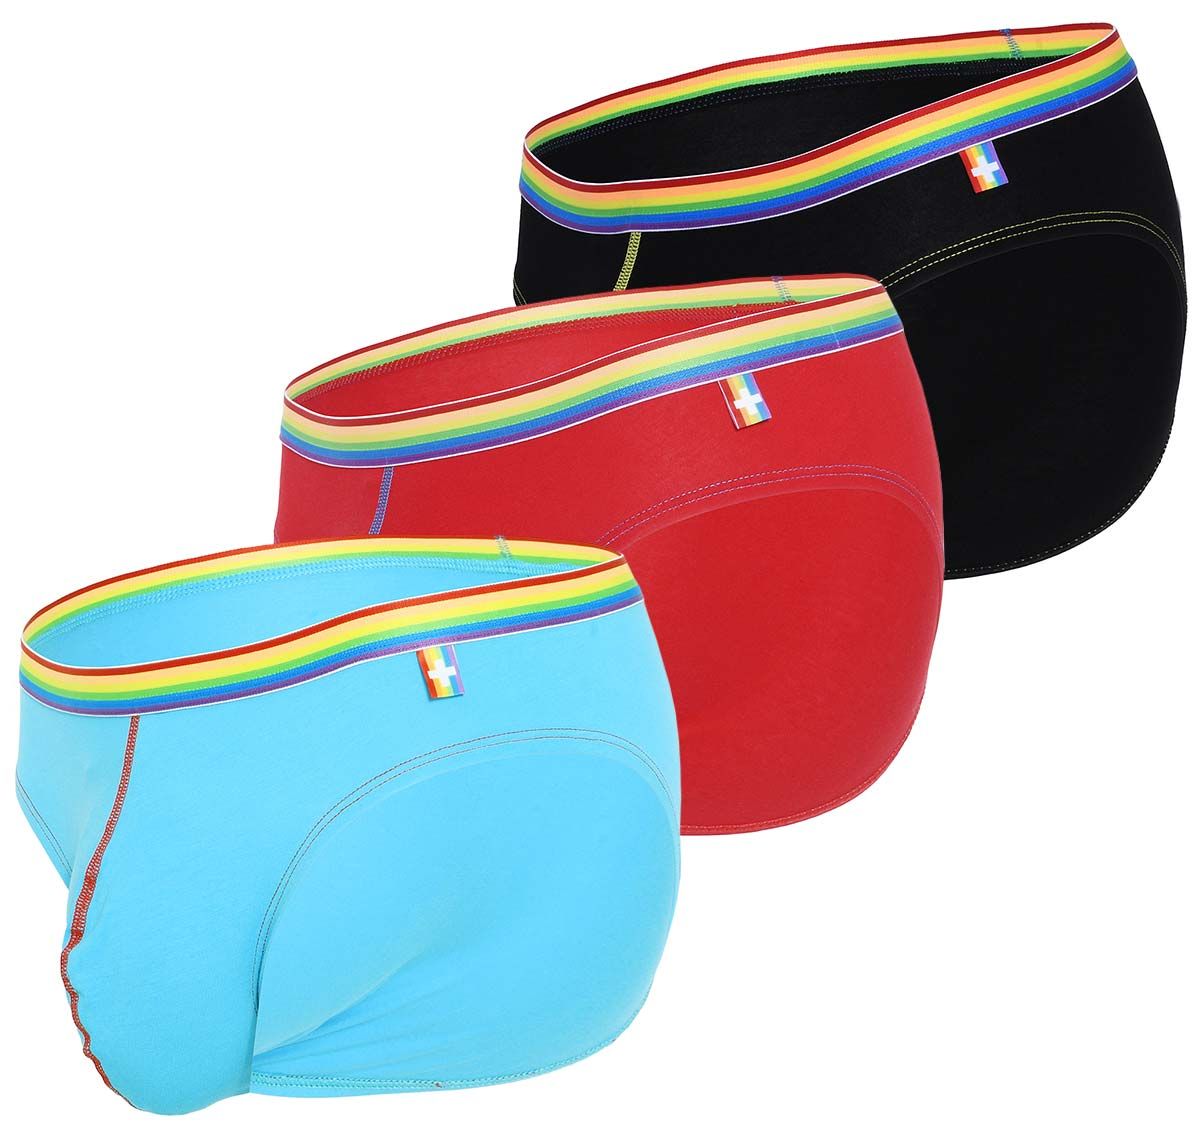 Andrew Christian 3 Pack Briefs BOY BRIEF UNICORN 3-PACK w/Almost Naked 91702, red/blue/black